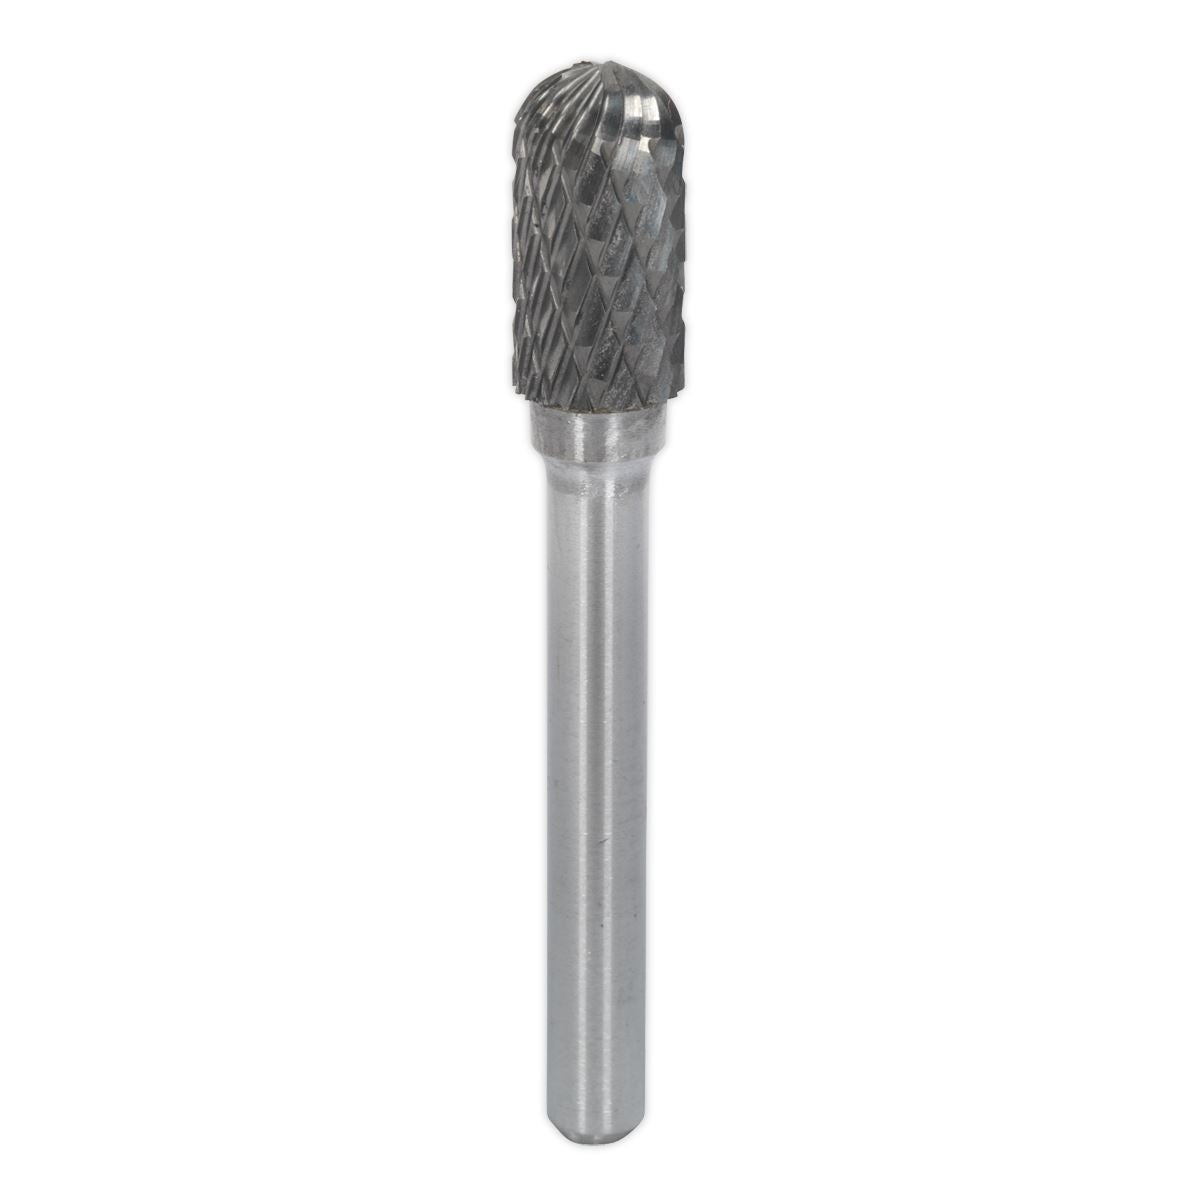 Sealey Tungsten Carbide Rotary Burrs 6mm Shank